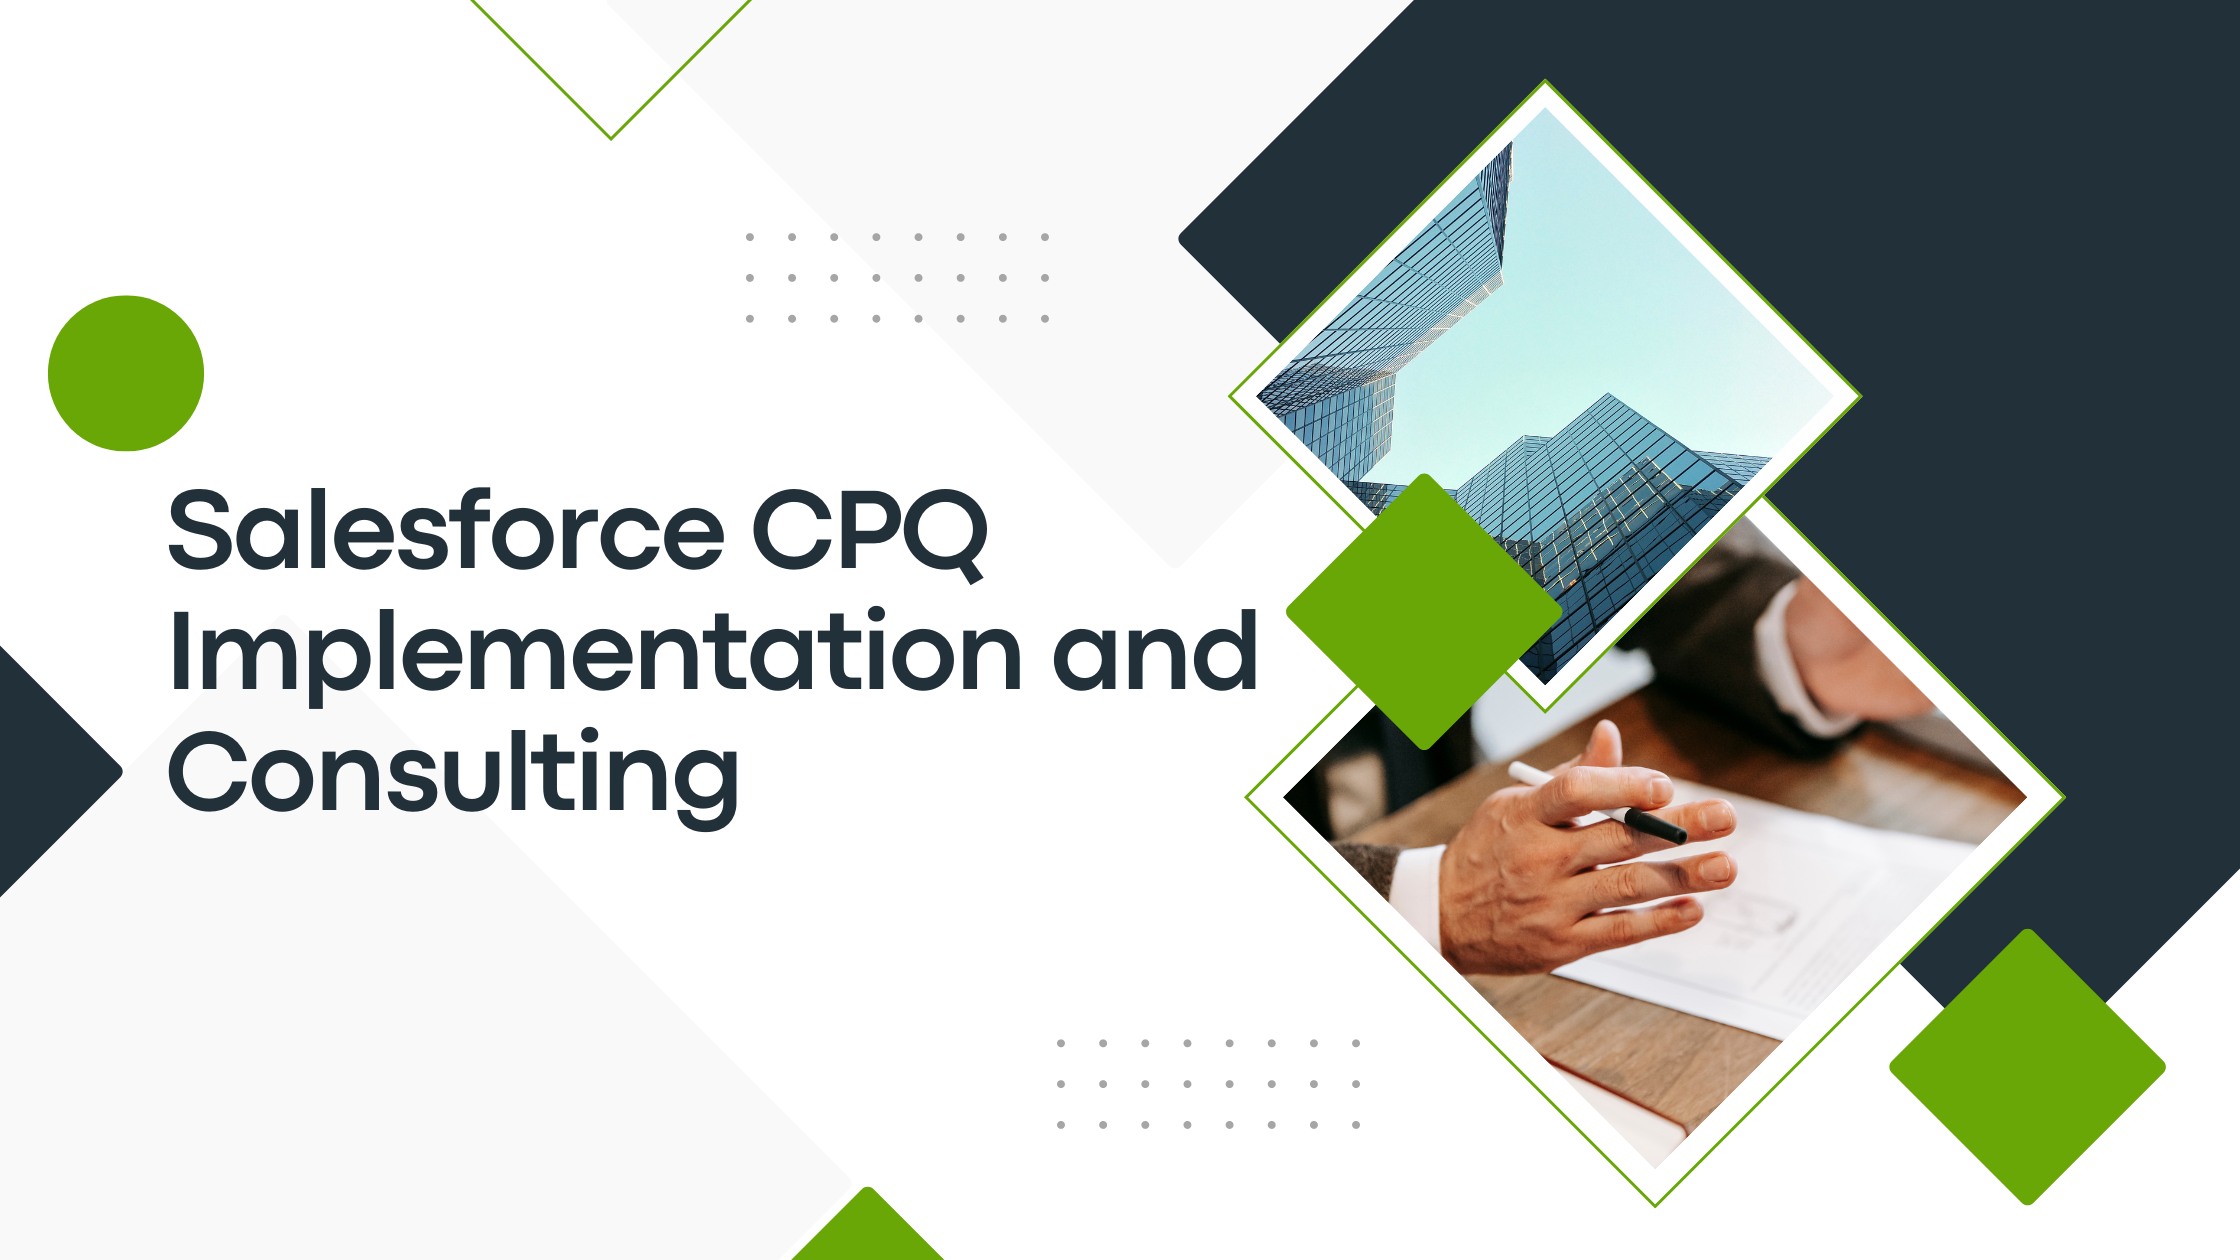 Salesforce CPQ Implementation and Consulting